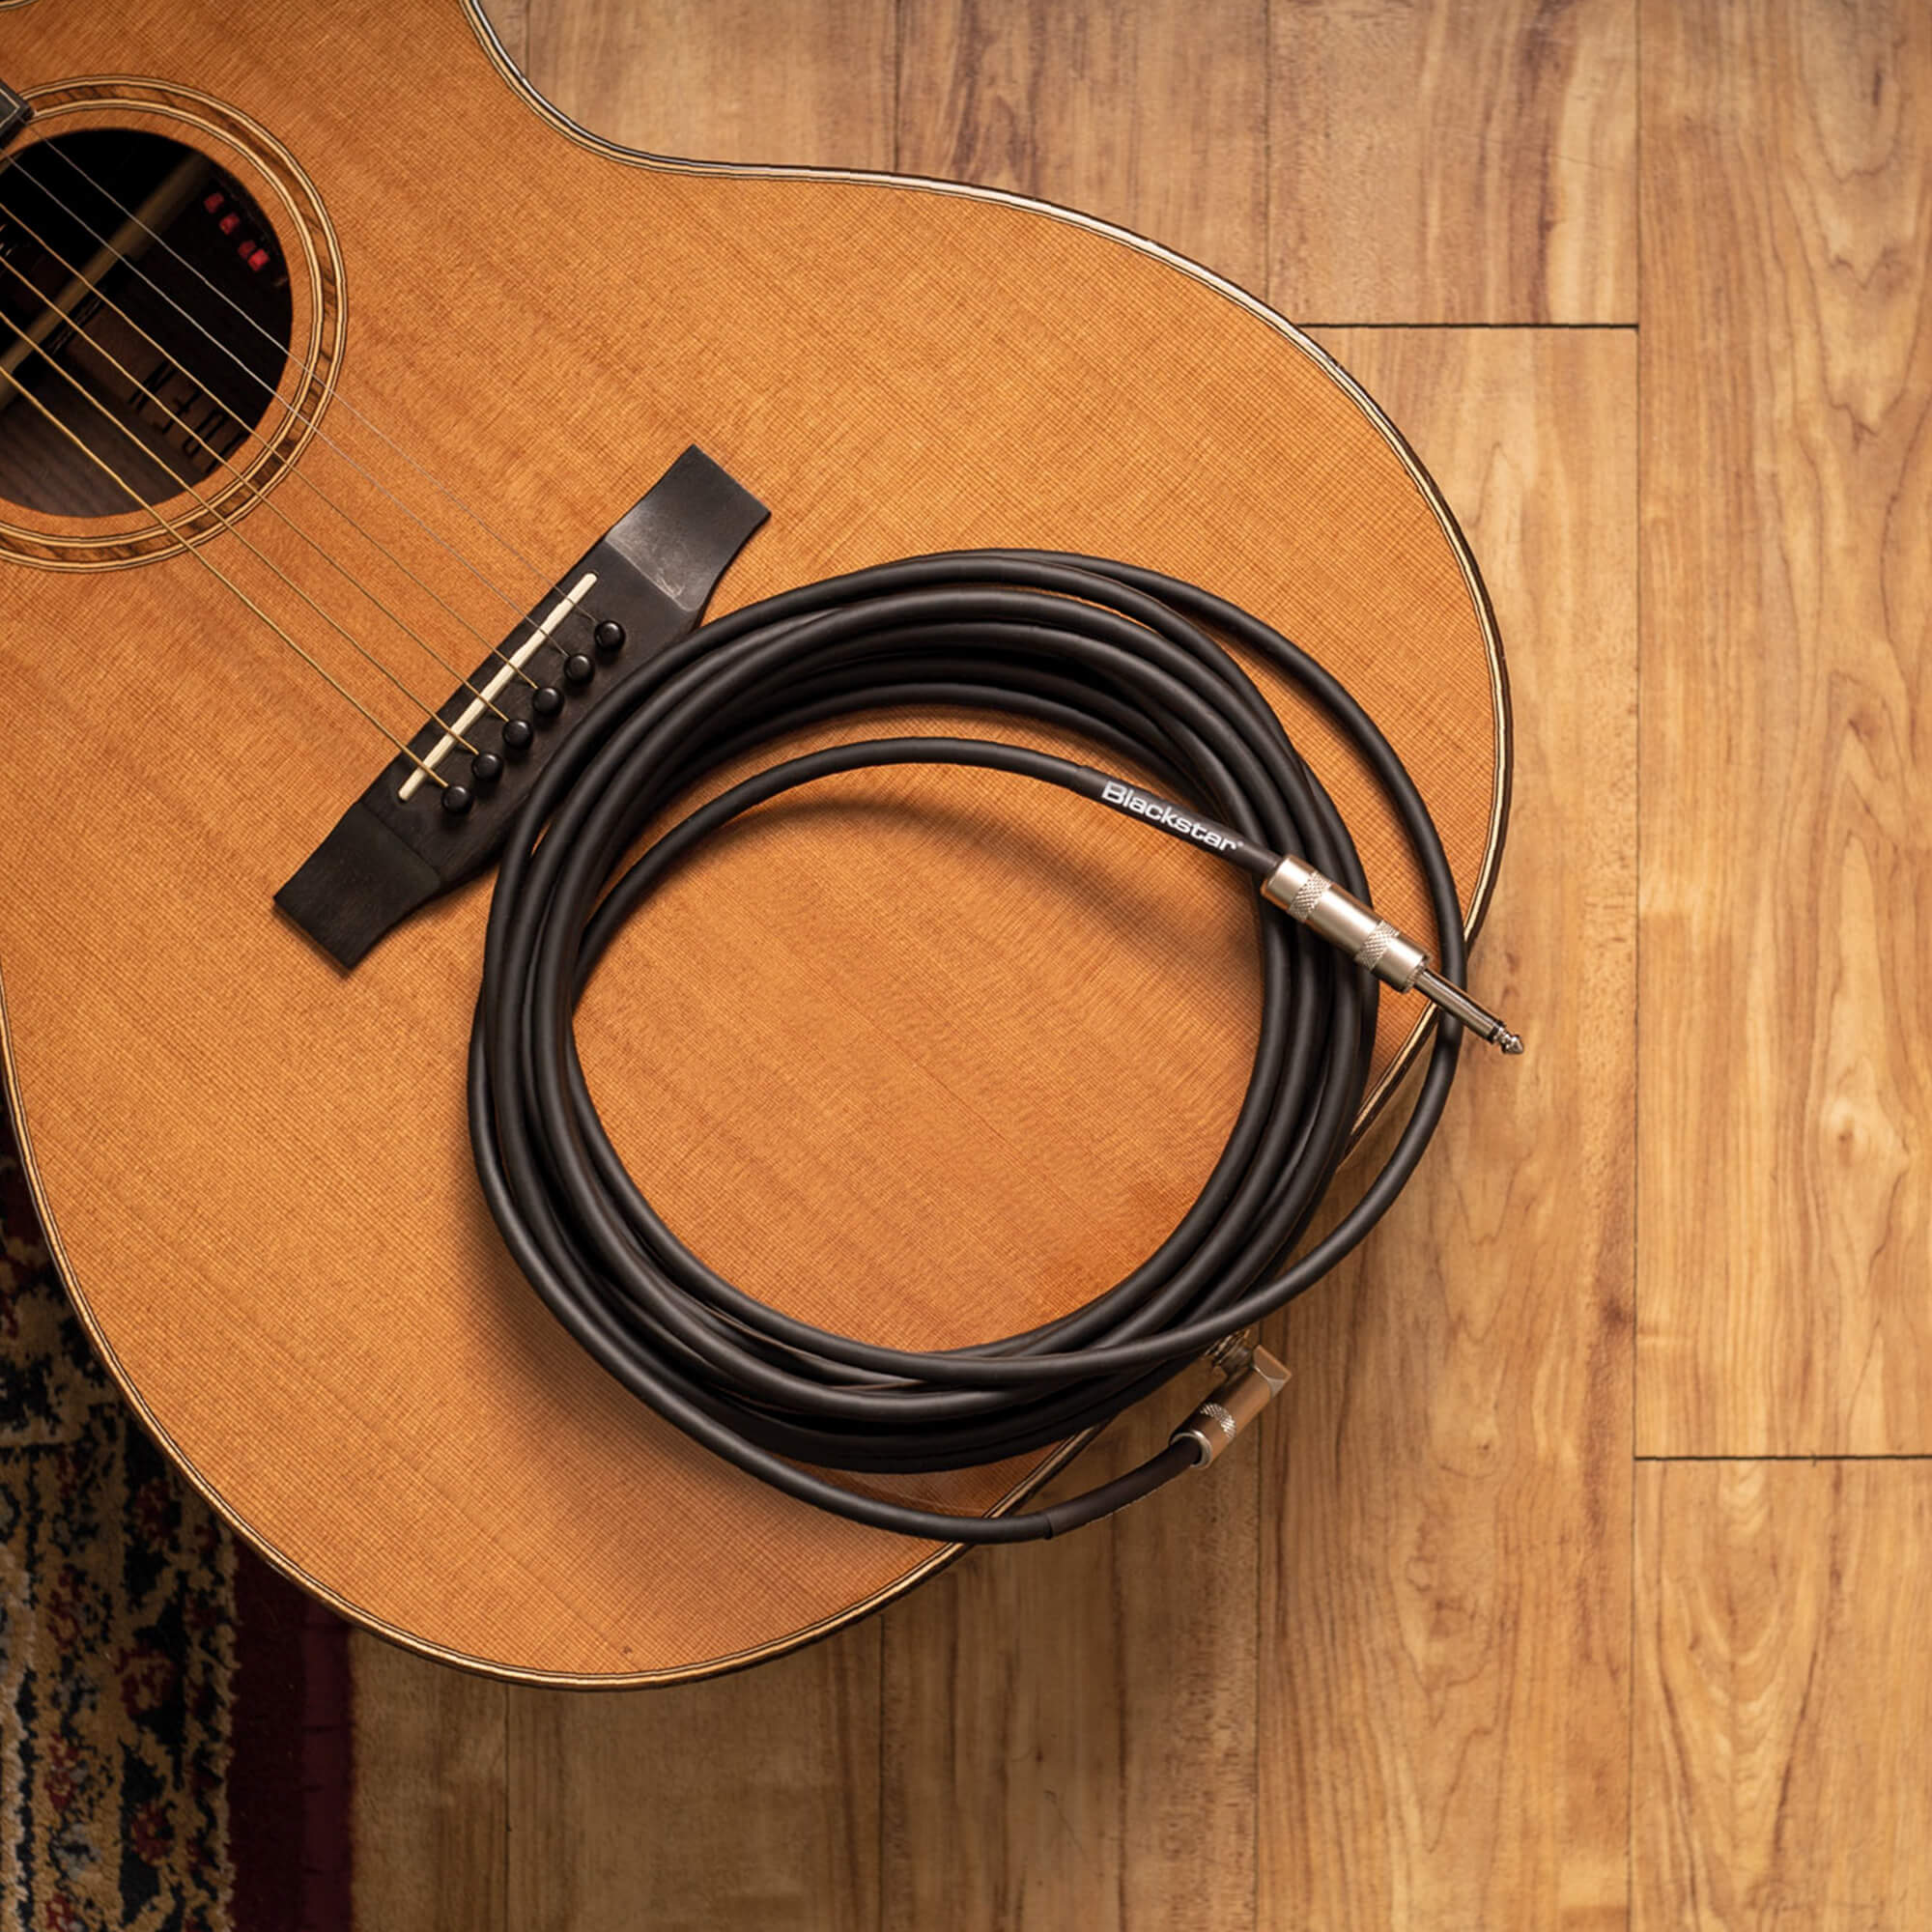 Blackstar instrument cable on an acoustic guitar